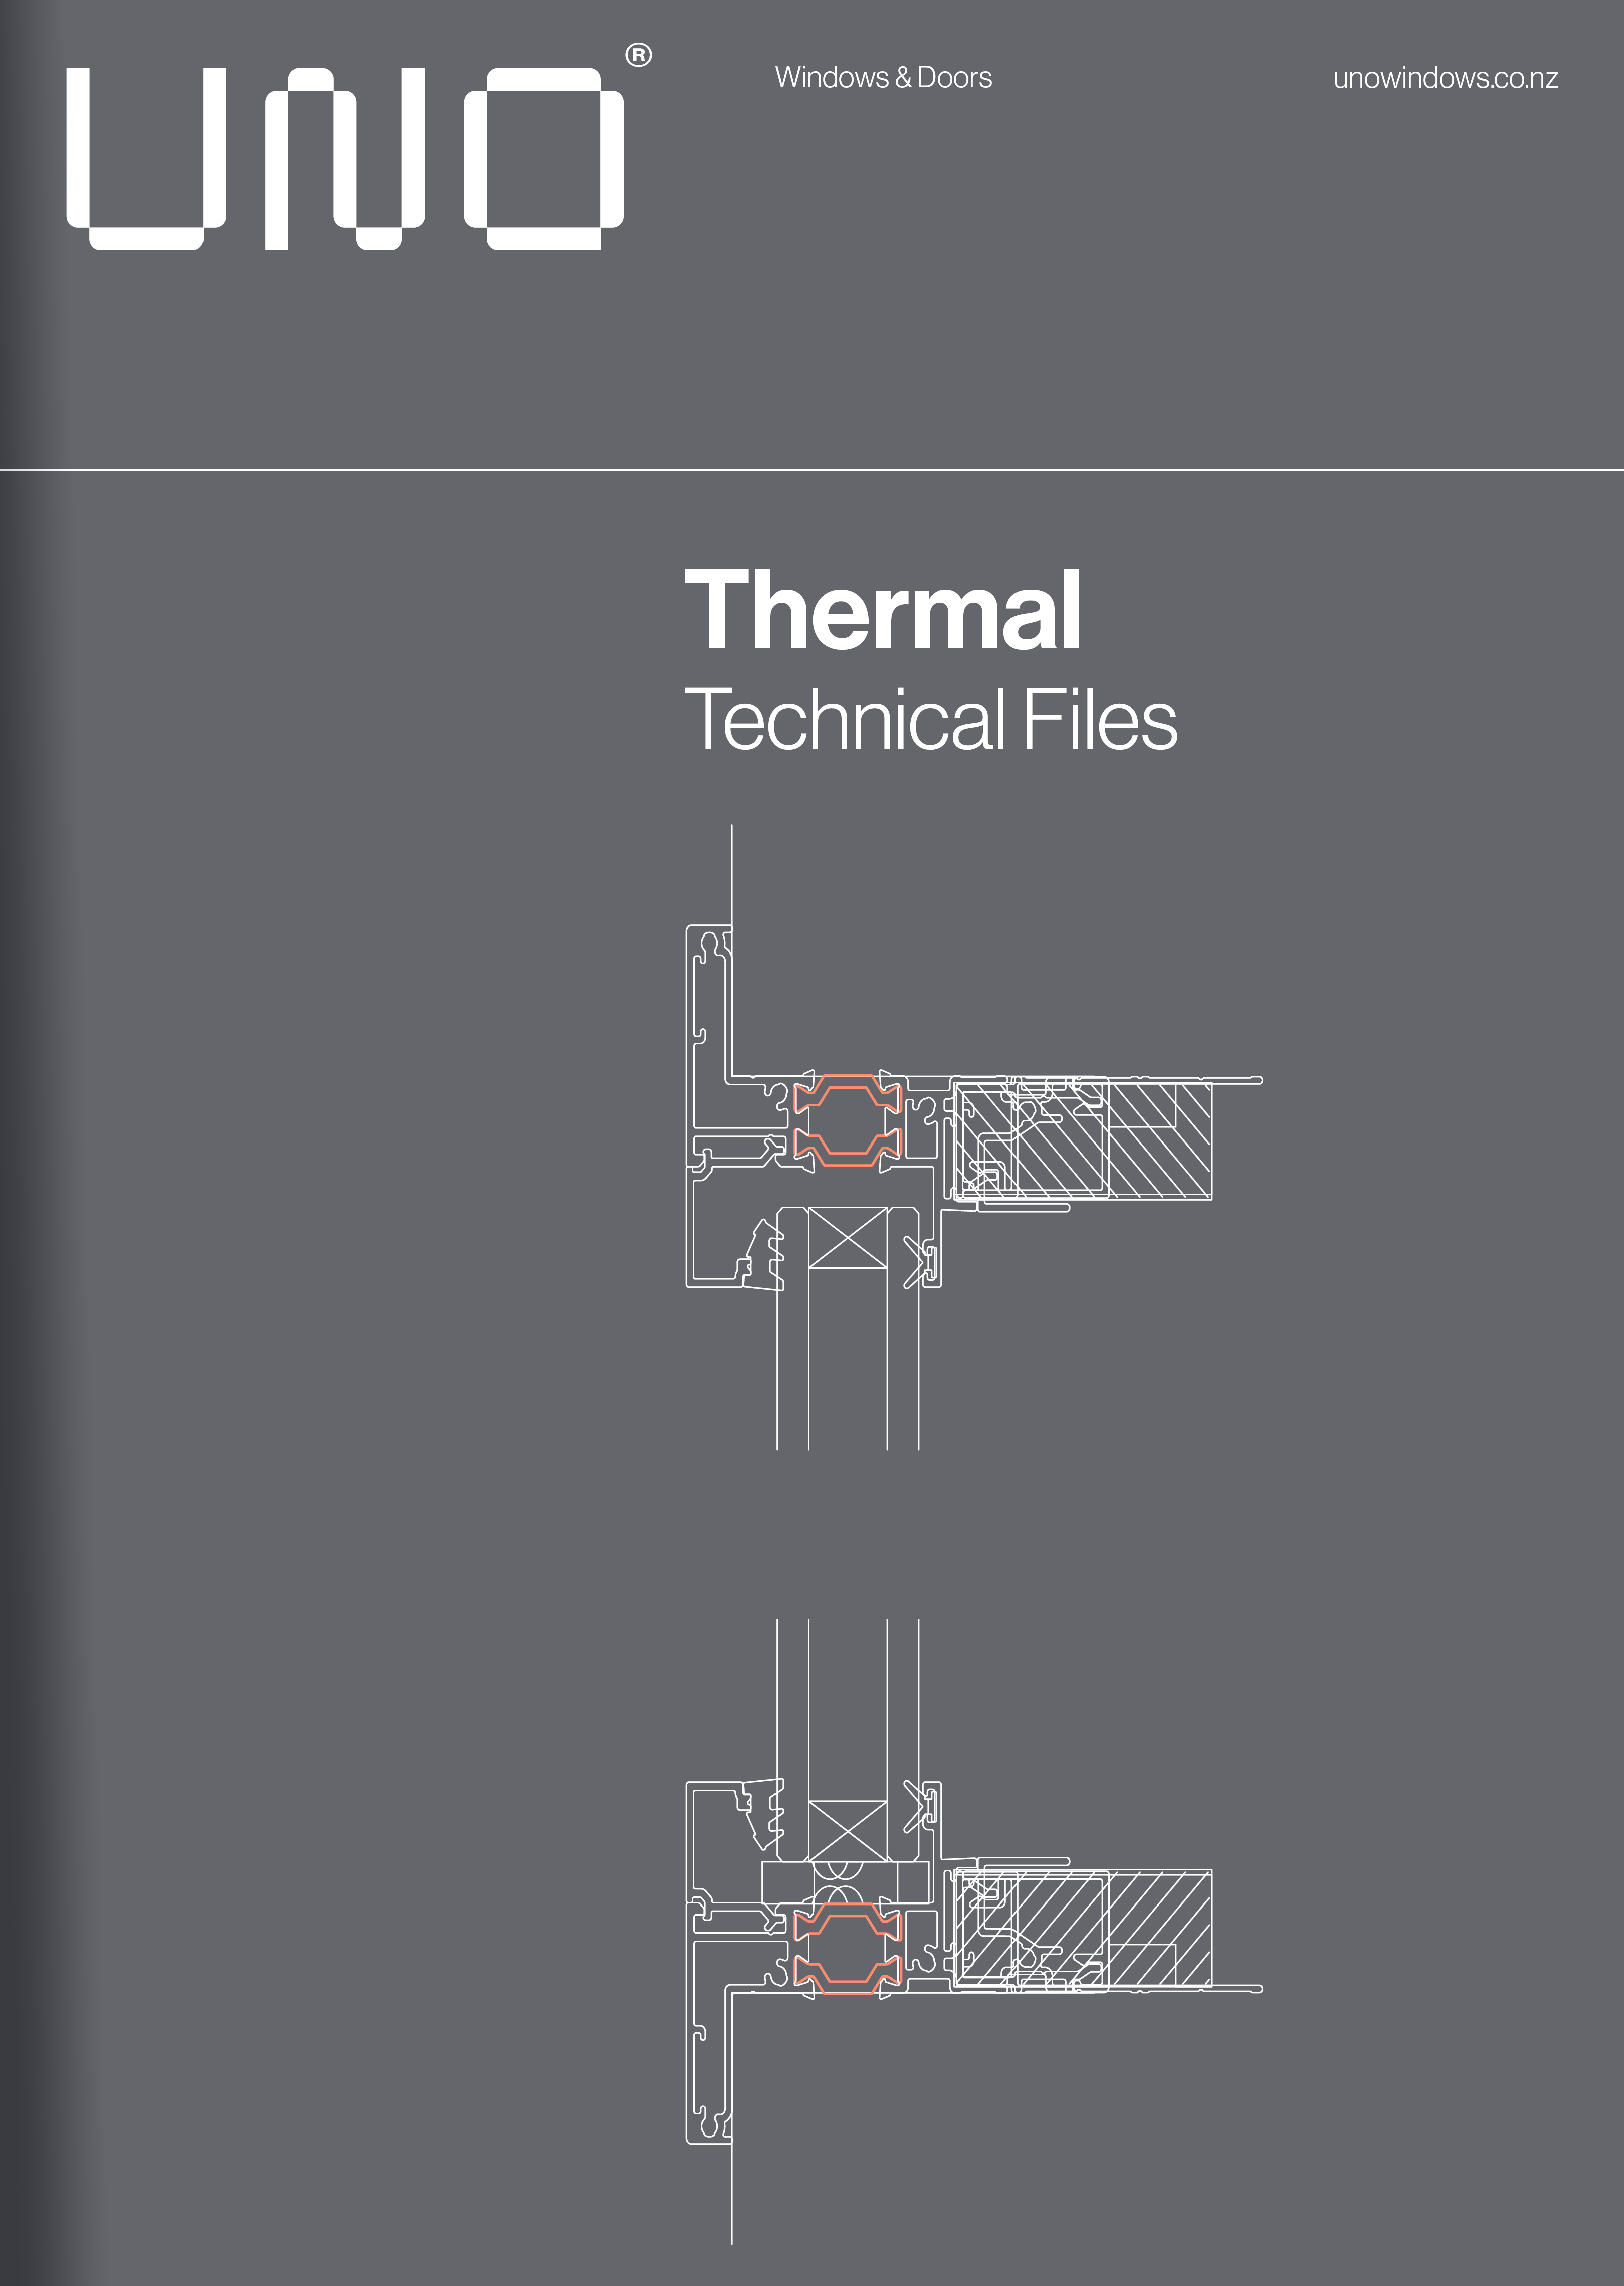 Download the thermal technical files 